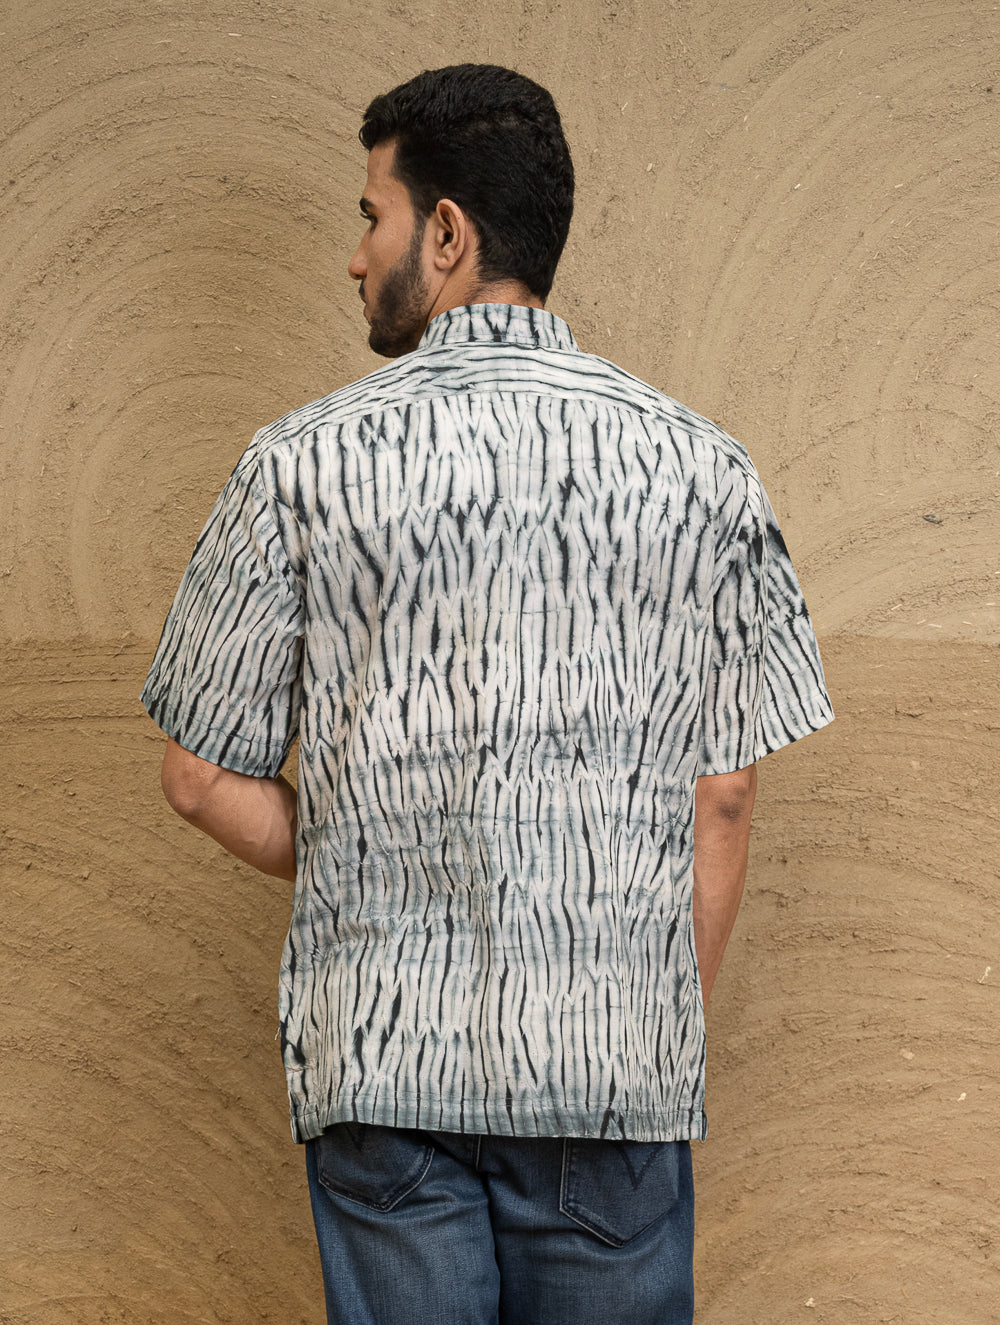 Load image into Gallery viewer, Shibori Hand Dyed Cotton Shirt - Black Waves